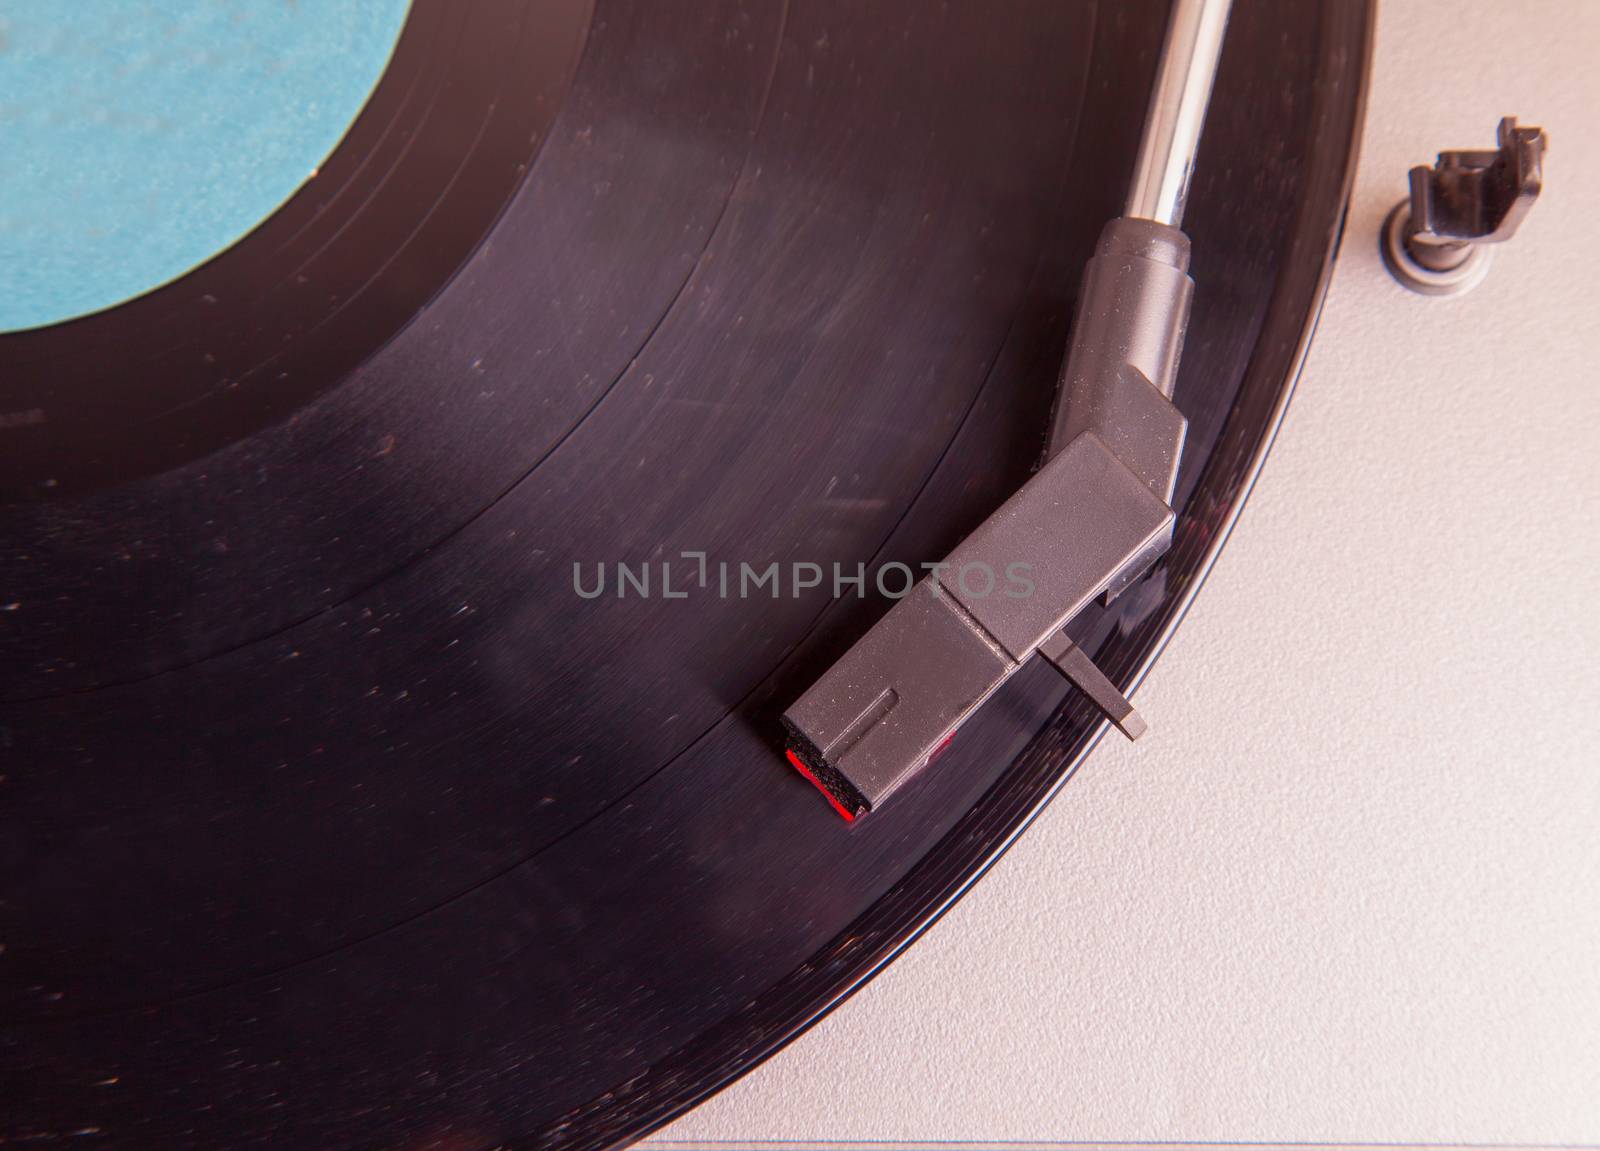 Turntable by Koufax73